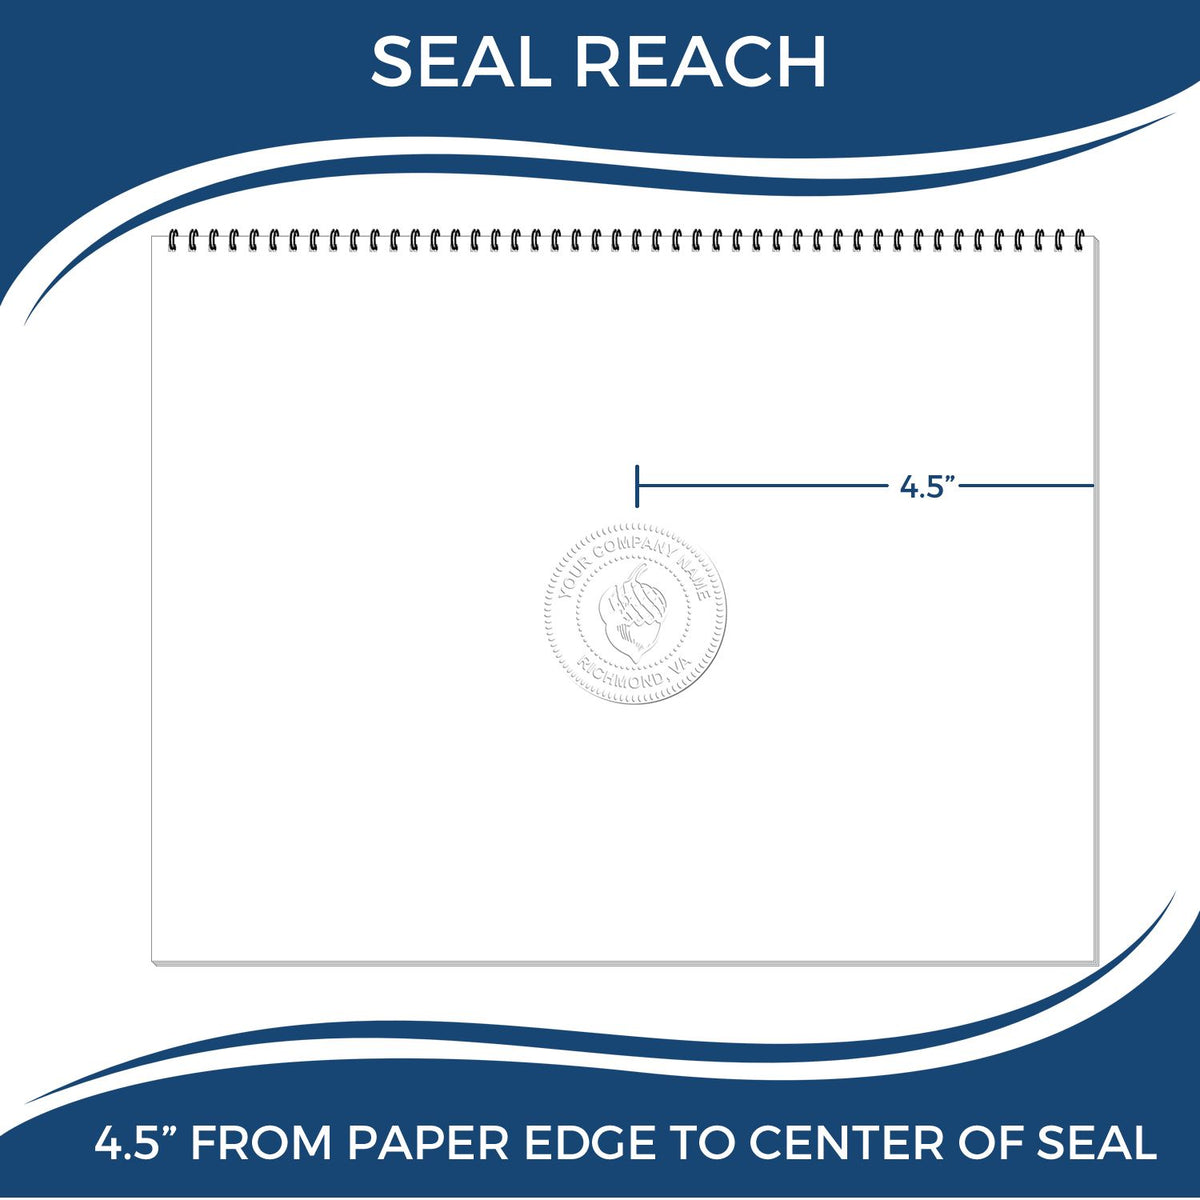 An infographic showing the seal reach which is represented by a ruler and a miniature seal image of the State of Illinois Extended Long Reach Geologist Seal